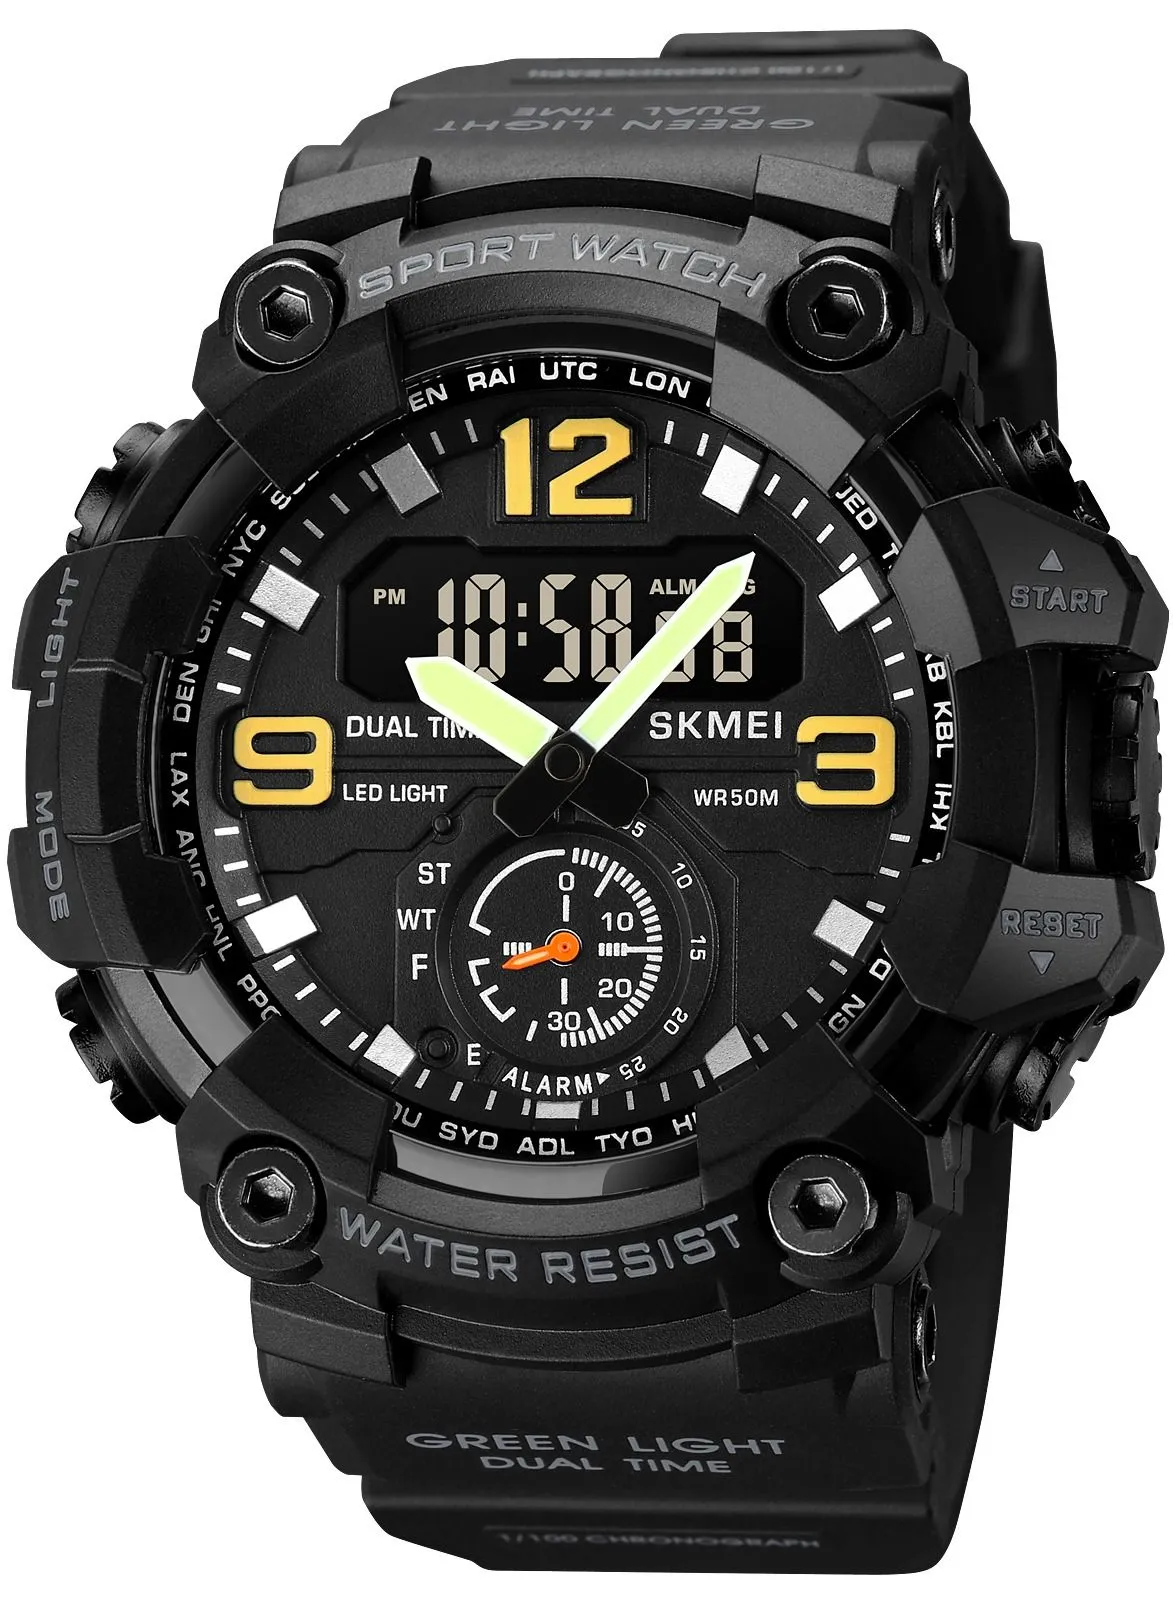 SKMEI Watches For Men Analog Digital Water Resistant And Sport Wrist Watch - 54 mm - Black